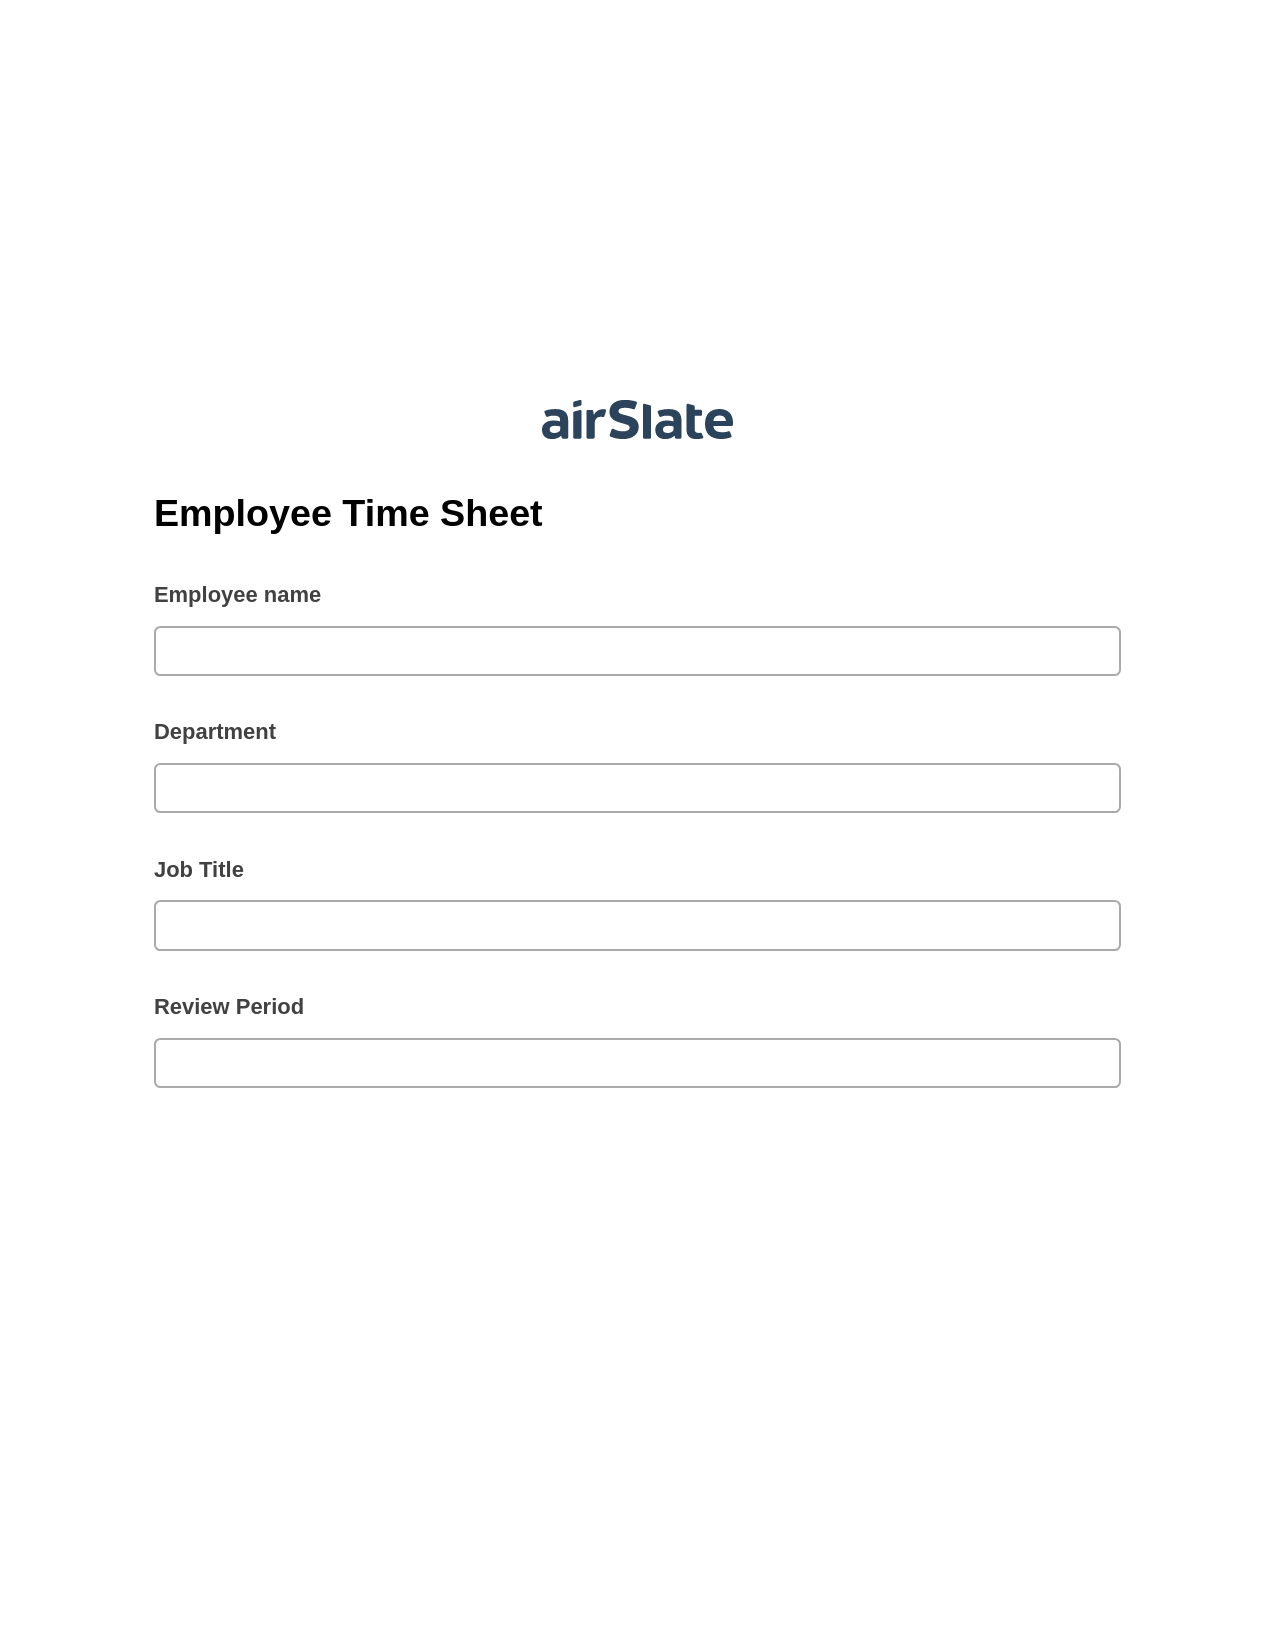 Multirole Employee Time Sheet Pre-fill from another Slate Bot, Create slate addon, Archive to OneDrive Bot